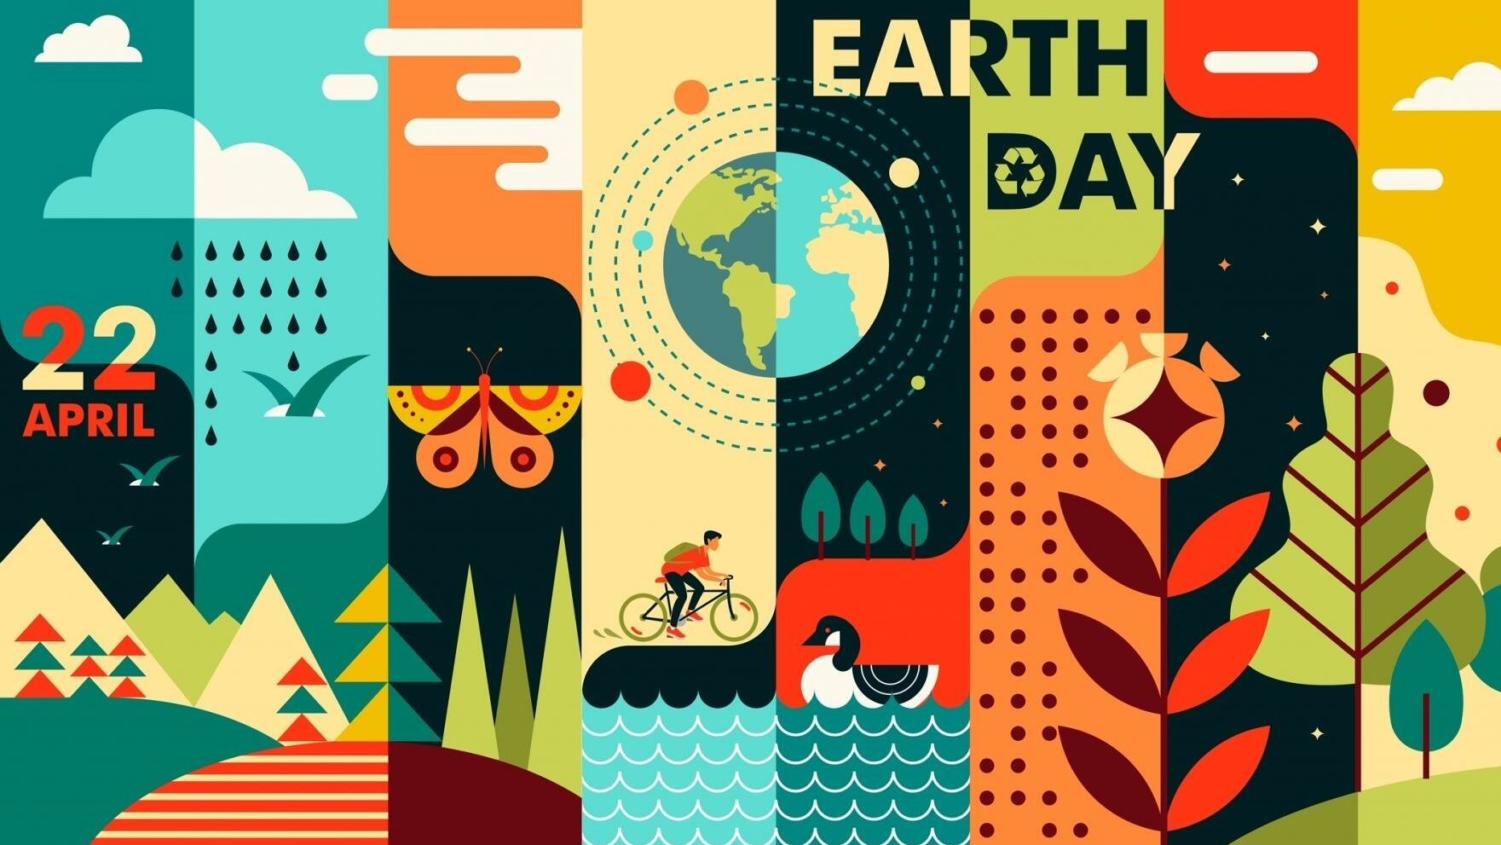 Earth Day 2021; The Time to Act is Now Mountain View Mirror